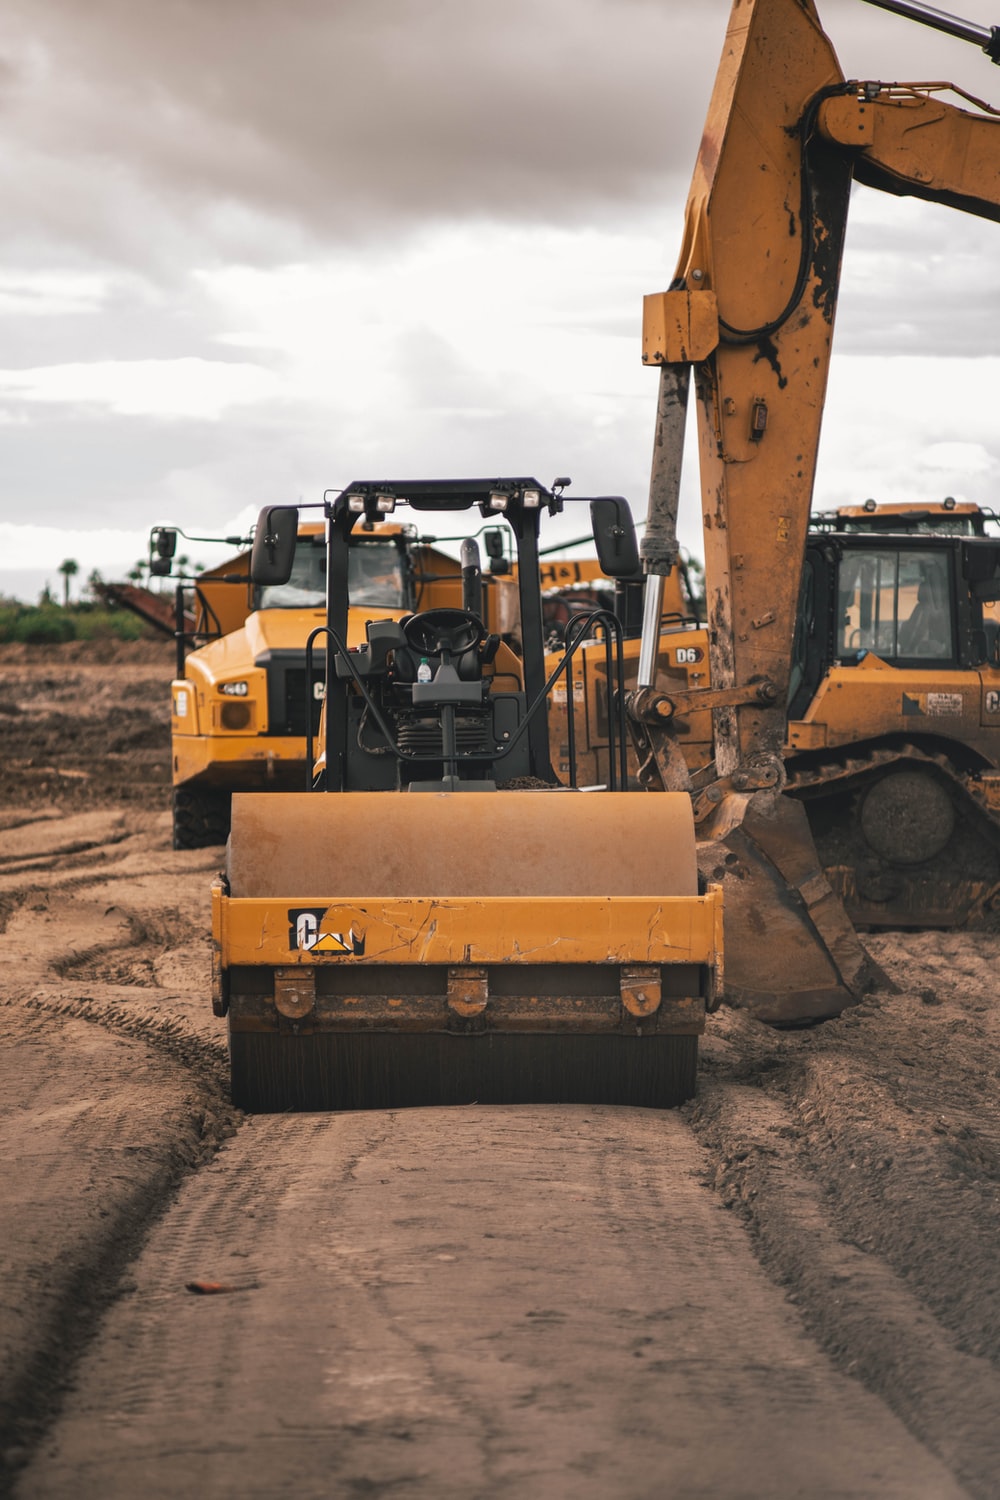 Construction Equipment Picture. Download Free Image